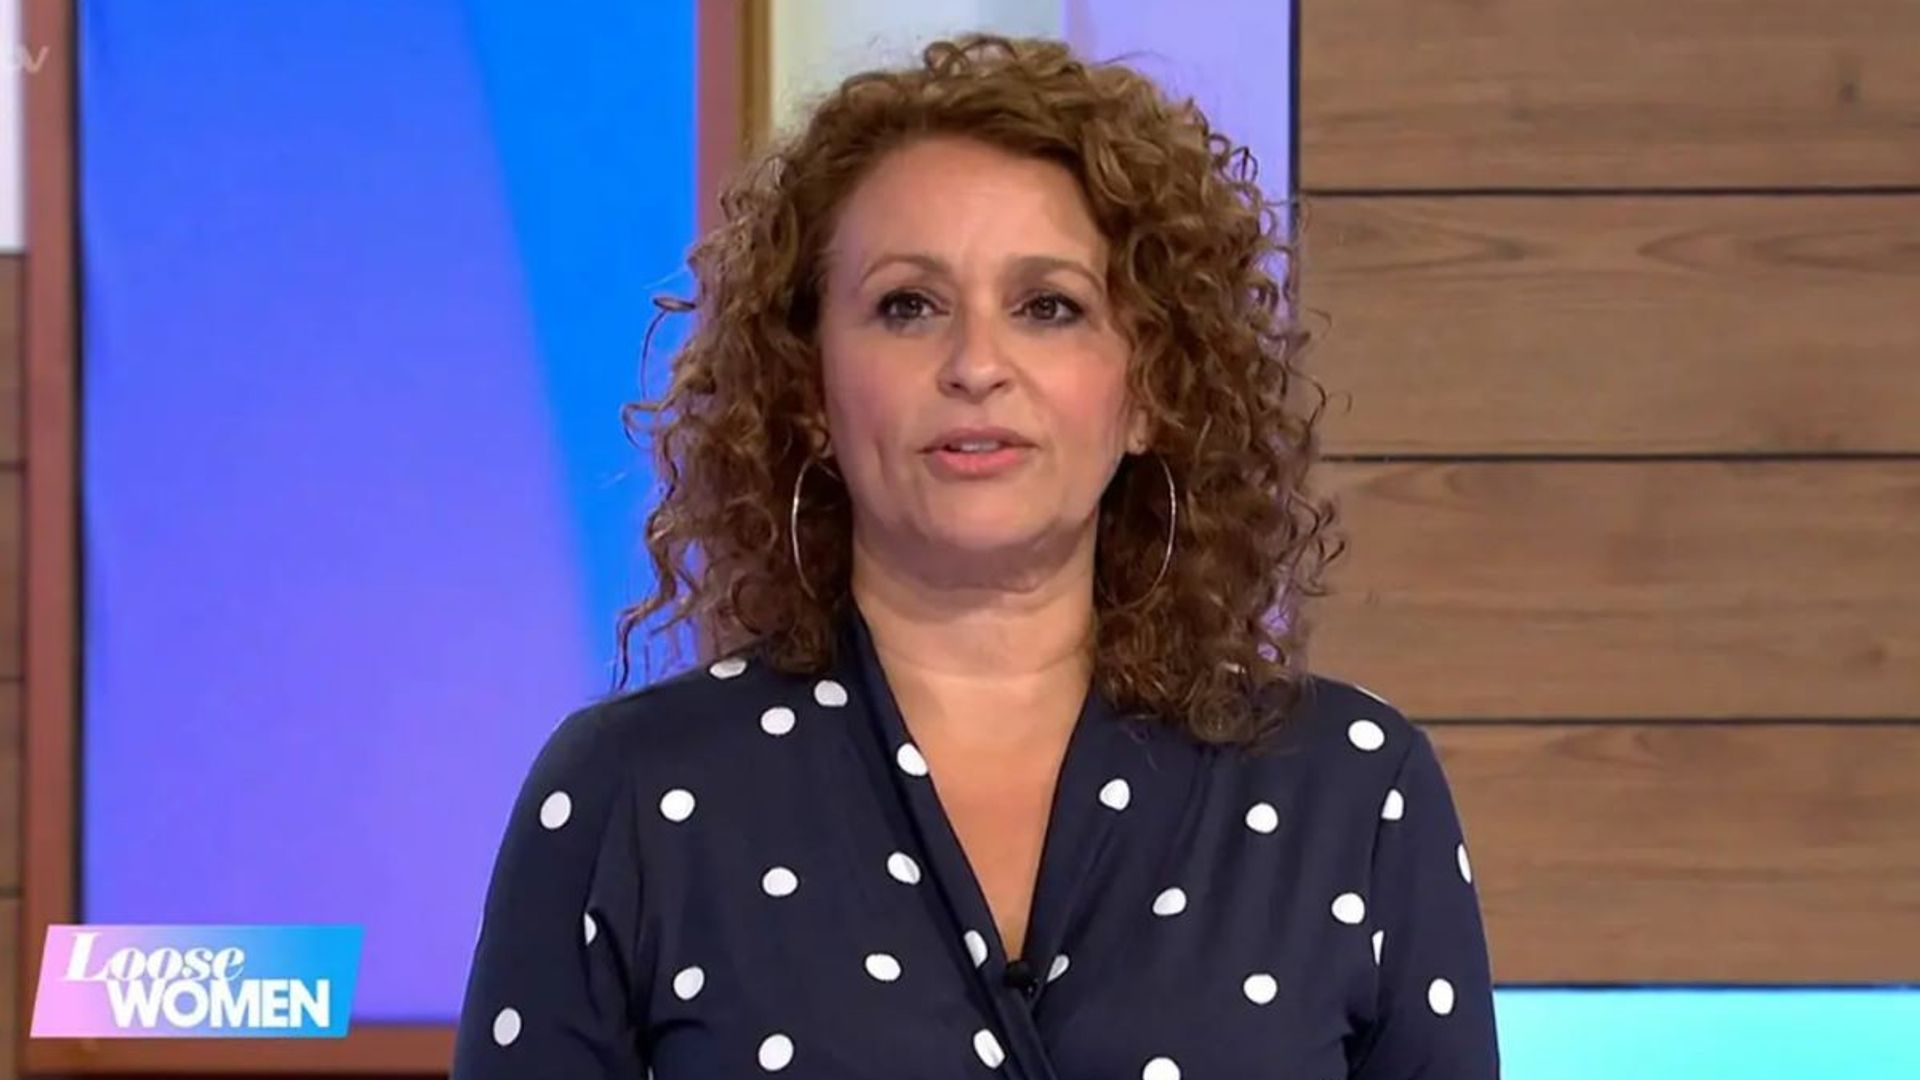 Loose Womens Nadia Sawalha Opens Up About Miscarriages In Heartfelt